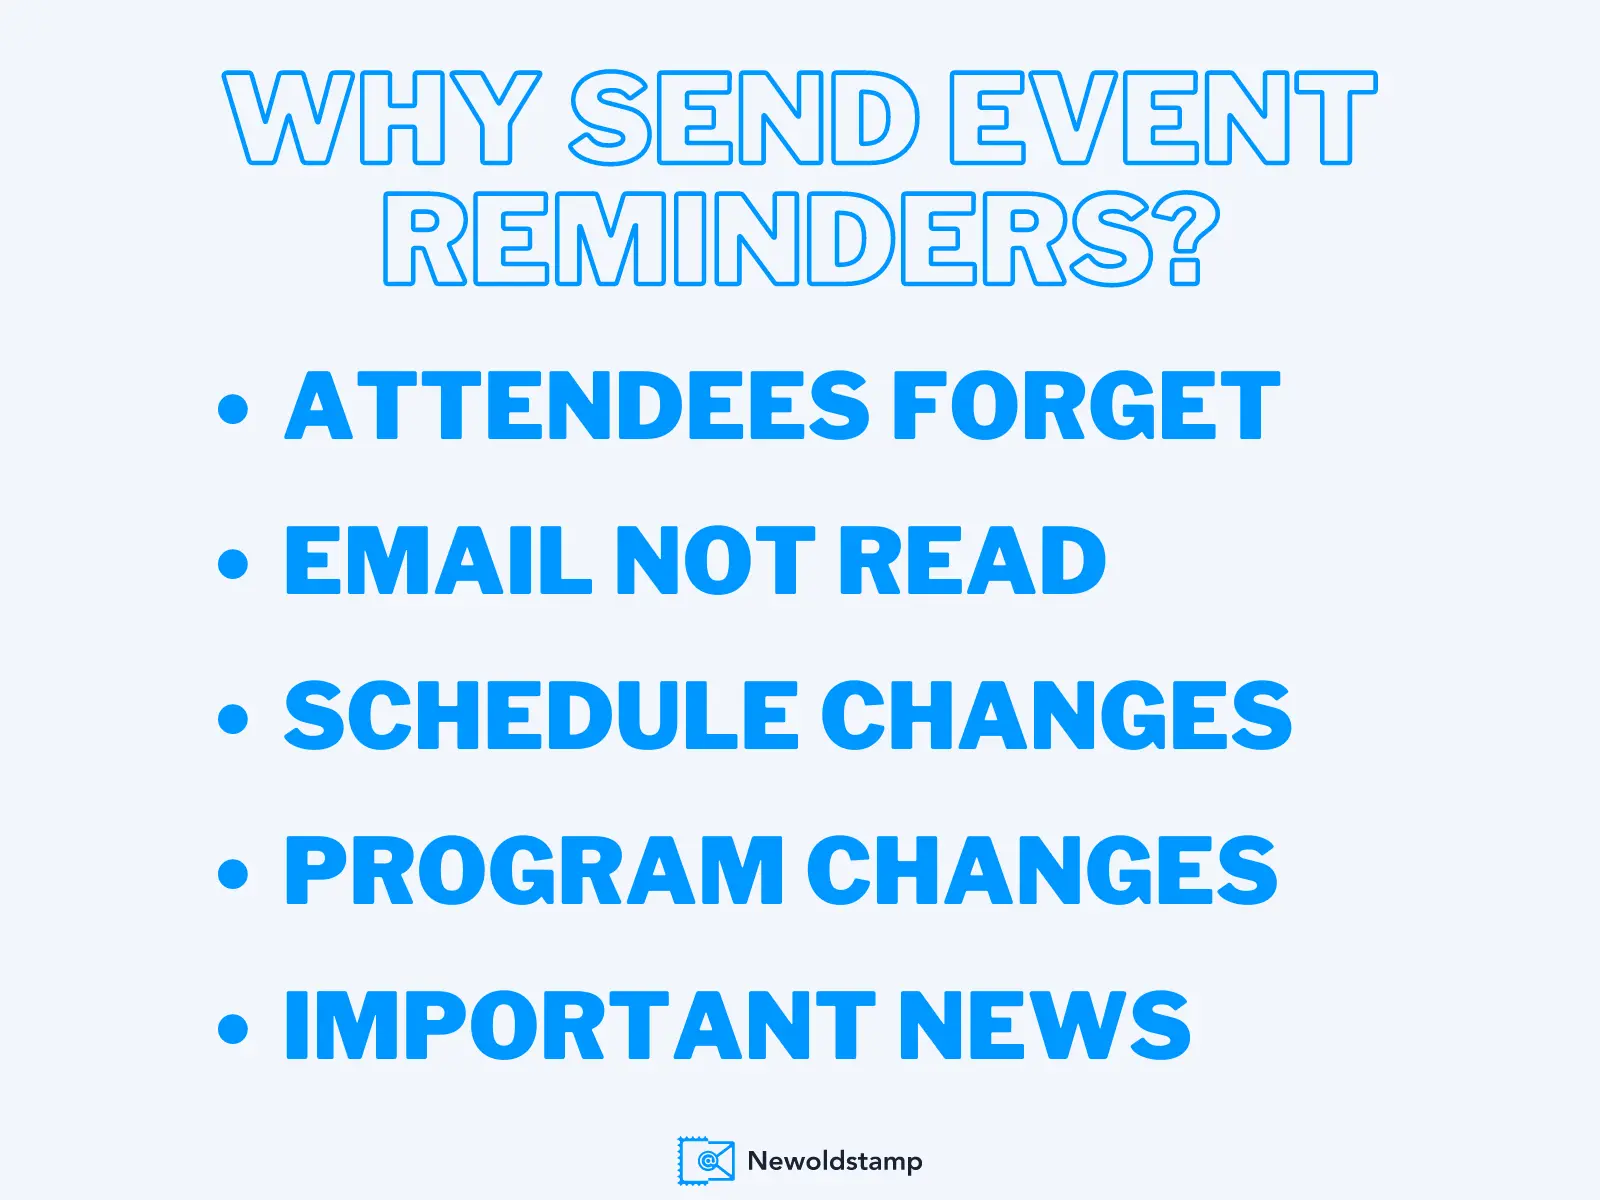 Reasons to send event reminders